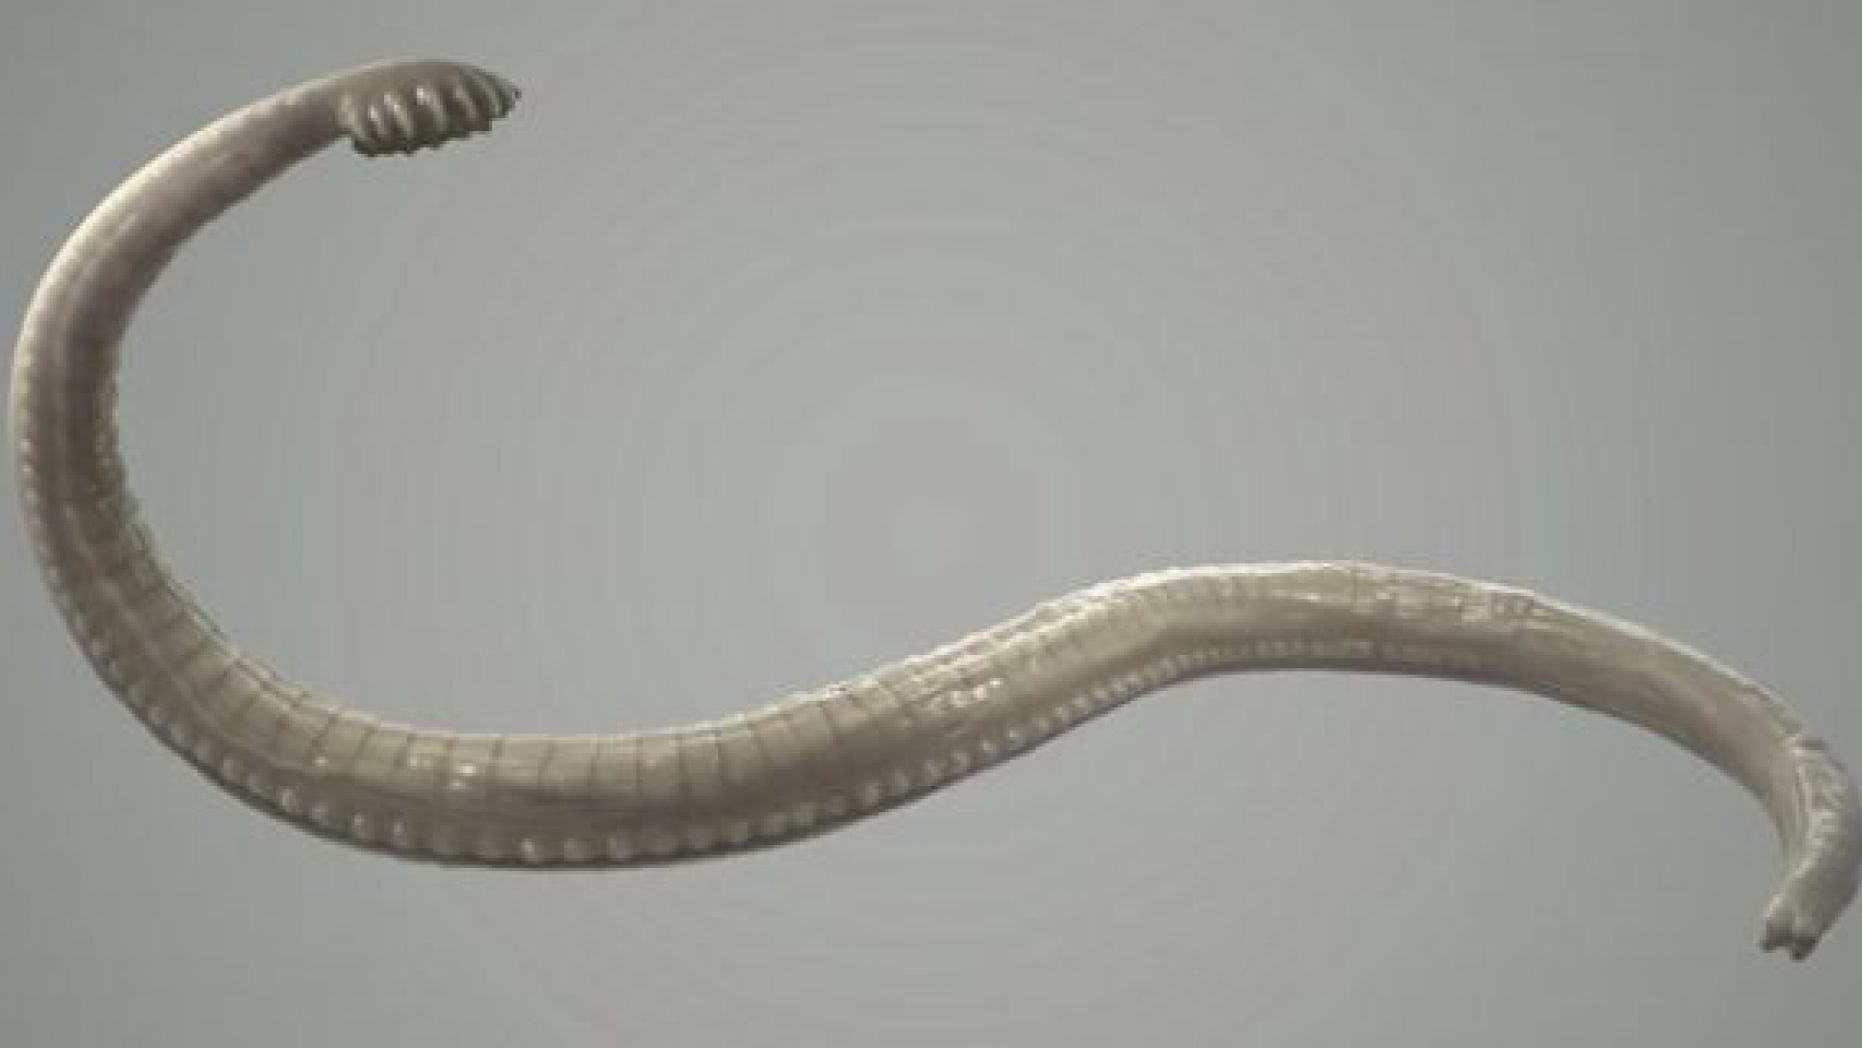 A tapeworm is a parasite that you can get if you eat the infected and undercooked meat of an animal.